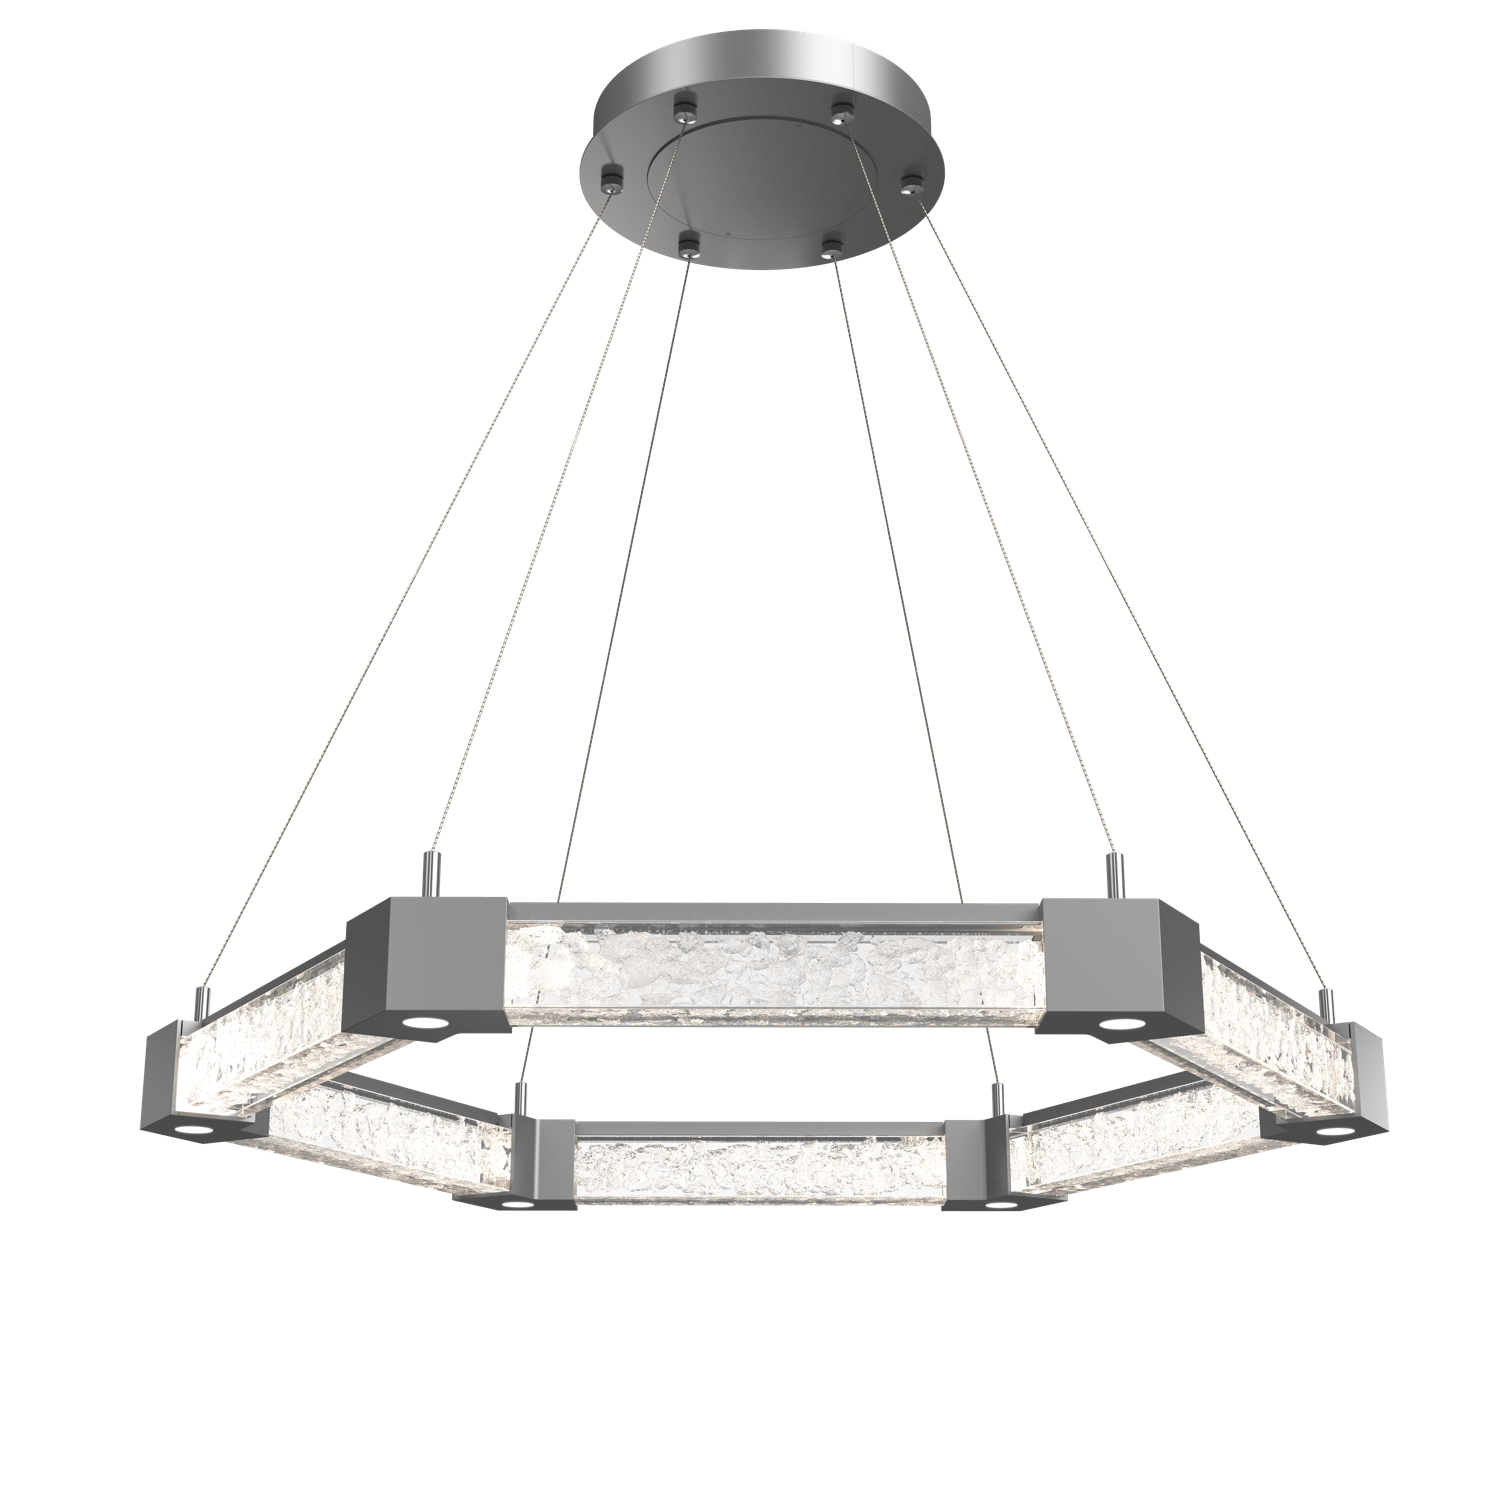 CHB0060-35-CS-GC-Hammerton-Studio-Axis-Hexagonal-Ring-Chandelier-with-Classic-Silver-finish-and-clear-cast-glass-and-LED-lamping